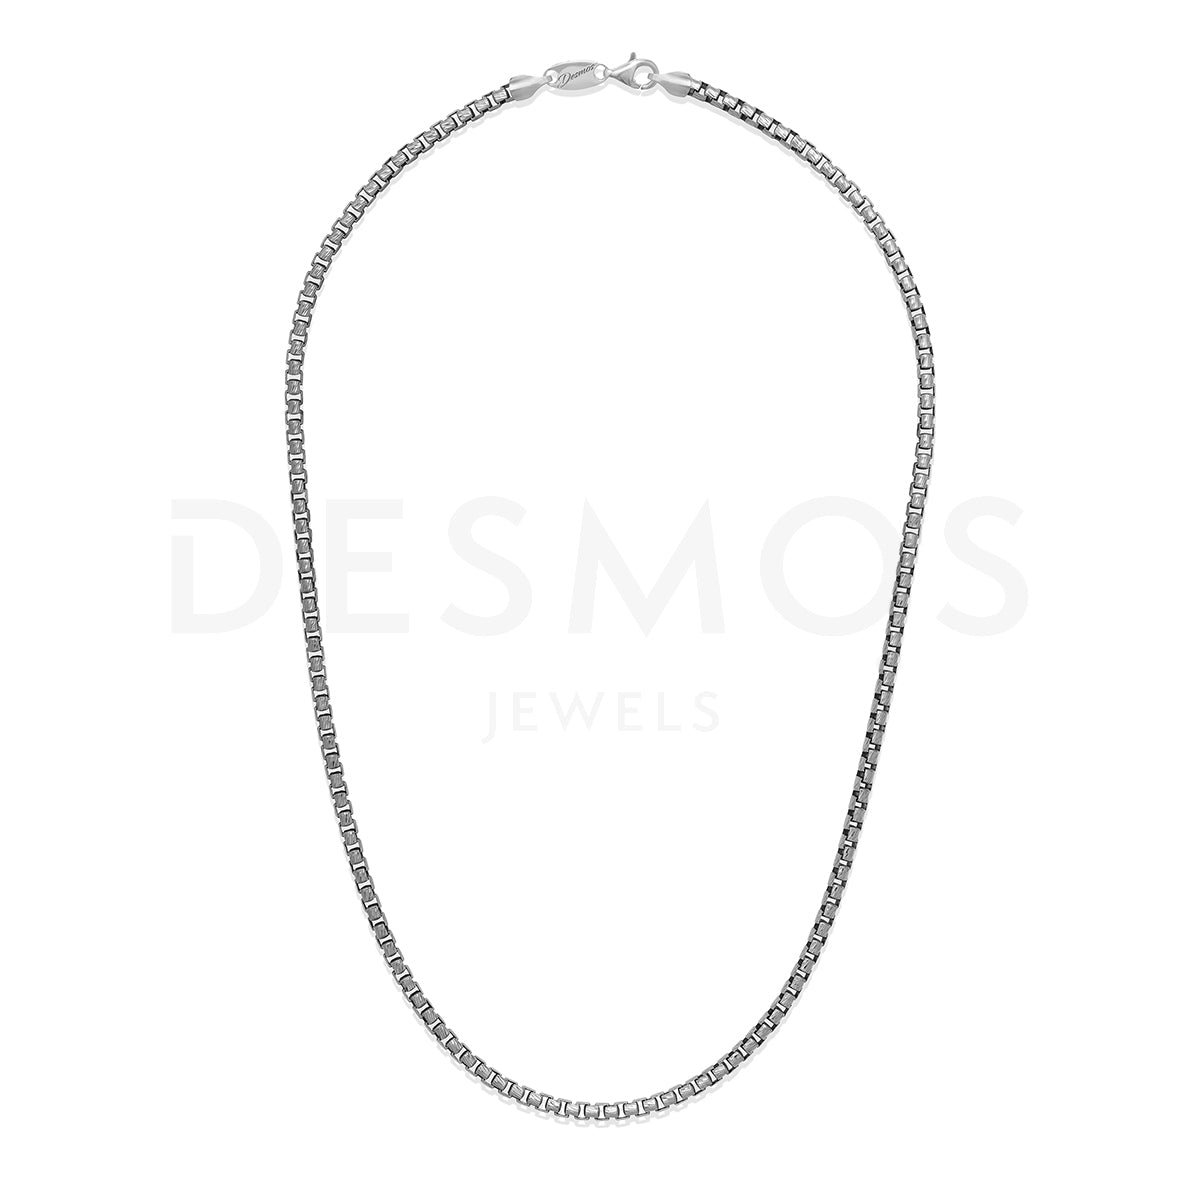 This Italian-made men's chain is crafted from 925 sterling silver and is coated with rhodium for added durability, adding a touch of elegance. Perfect for everyday wear, this versatile 20" Venetian box chain is 4.00 mm wide.